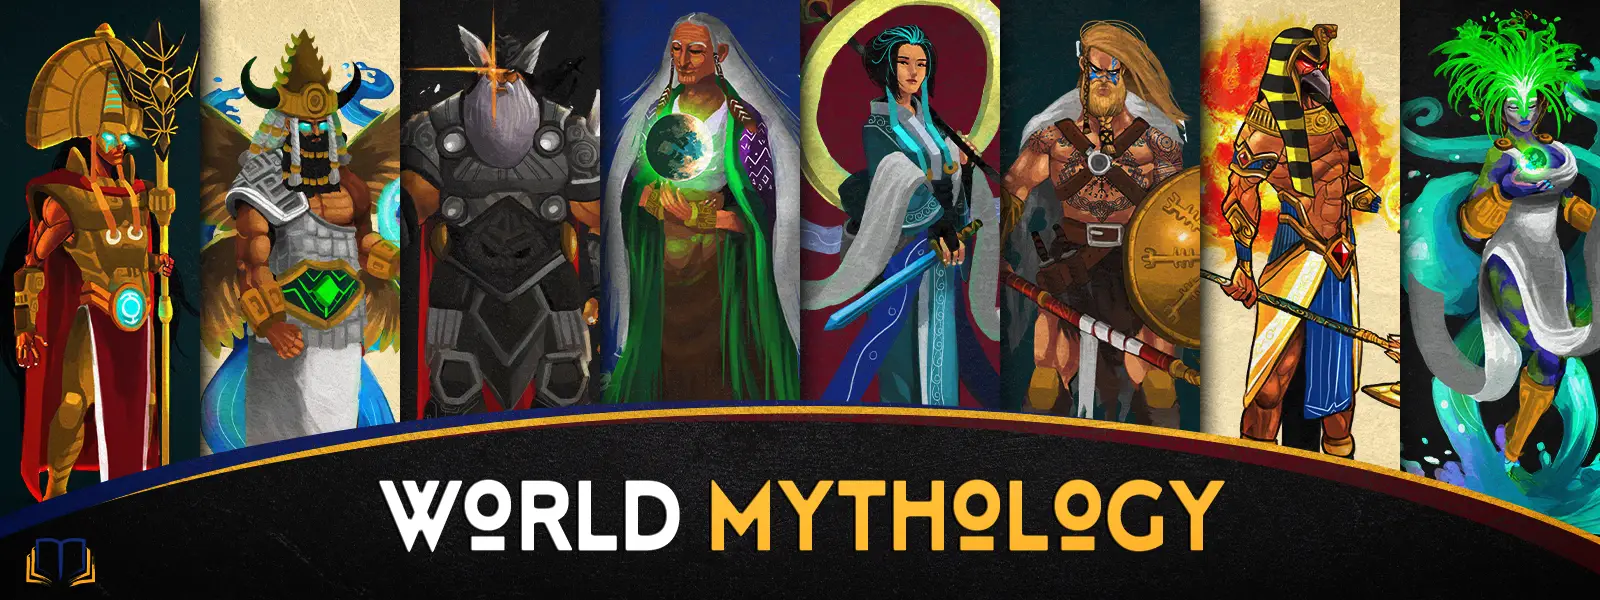 banner image with figures from all different world mythologies